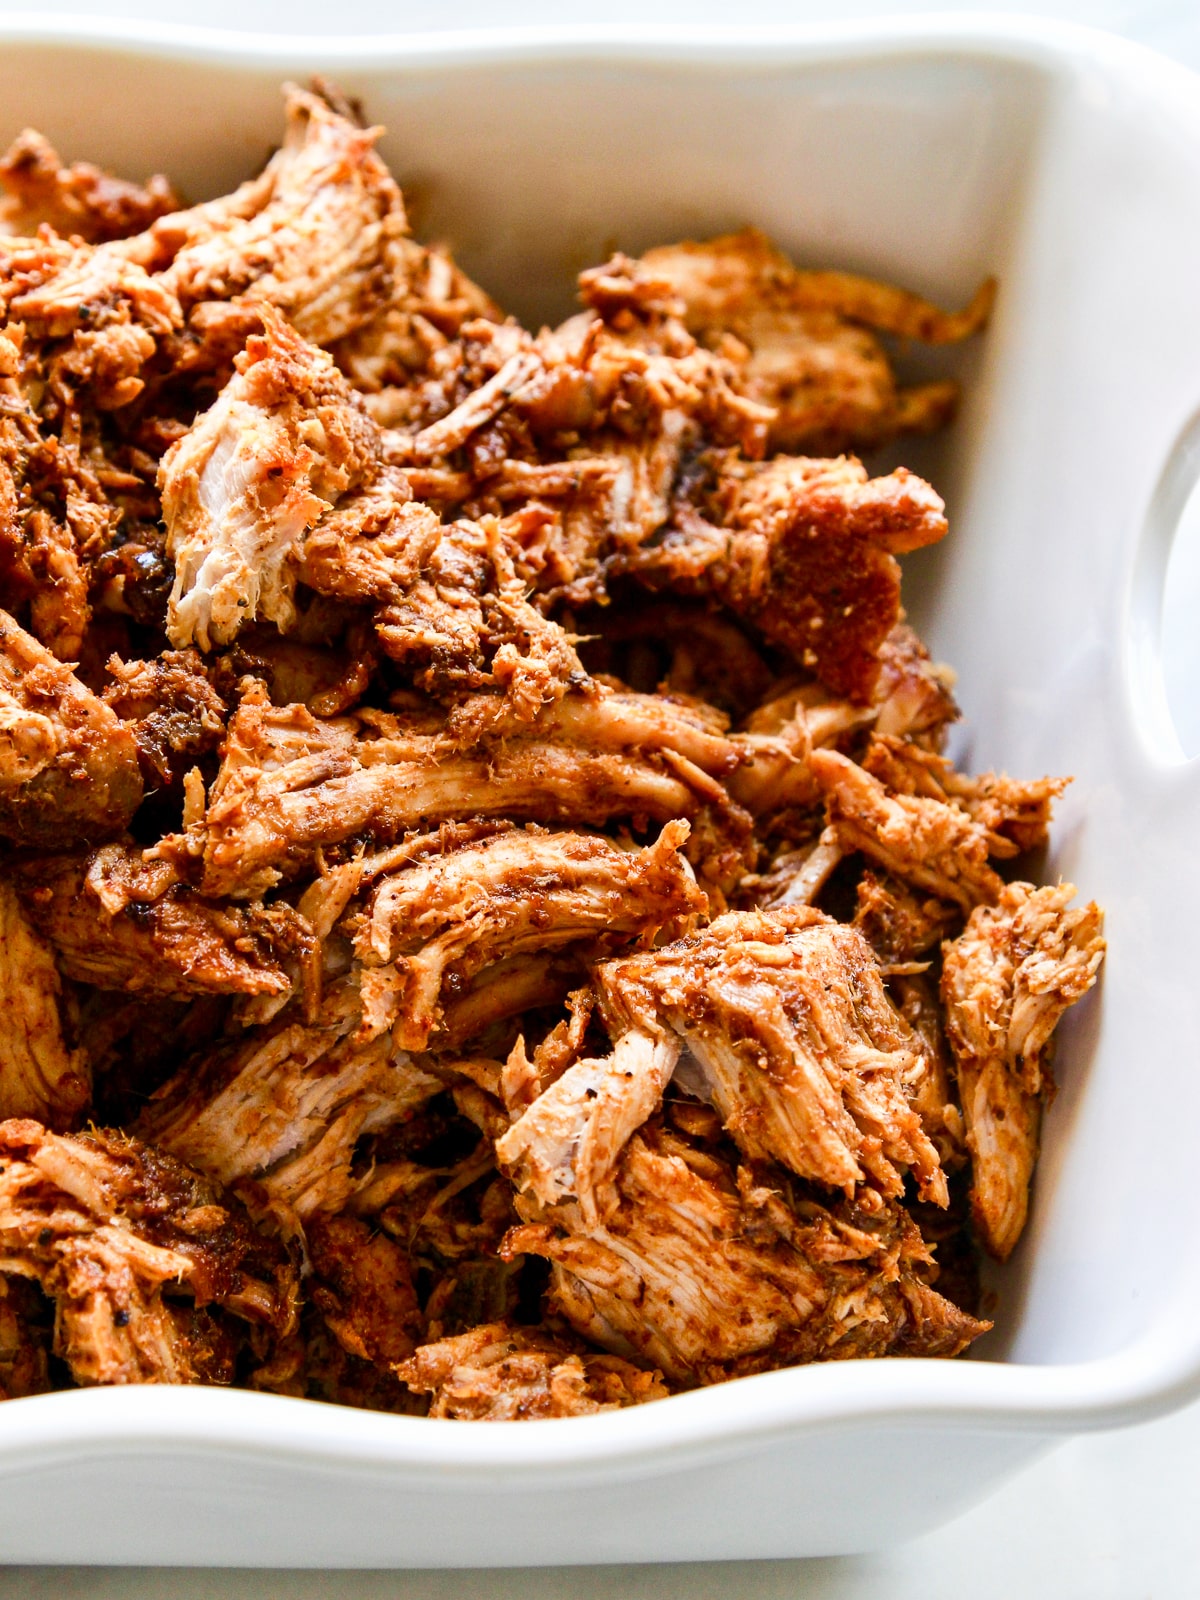 Pieces of pulled pork in a white casserole dish ready for dinner.